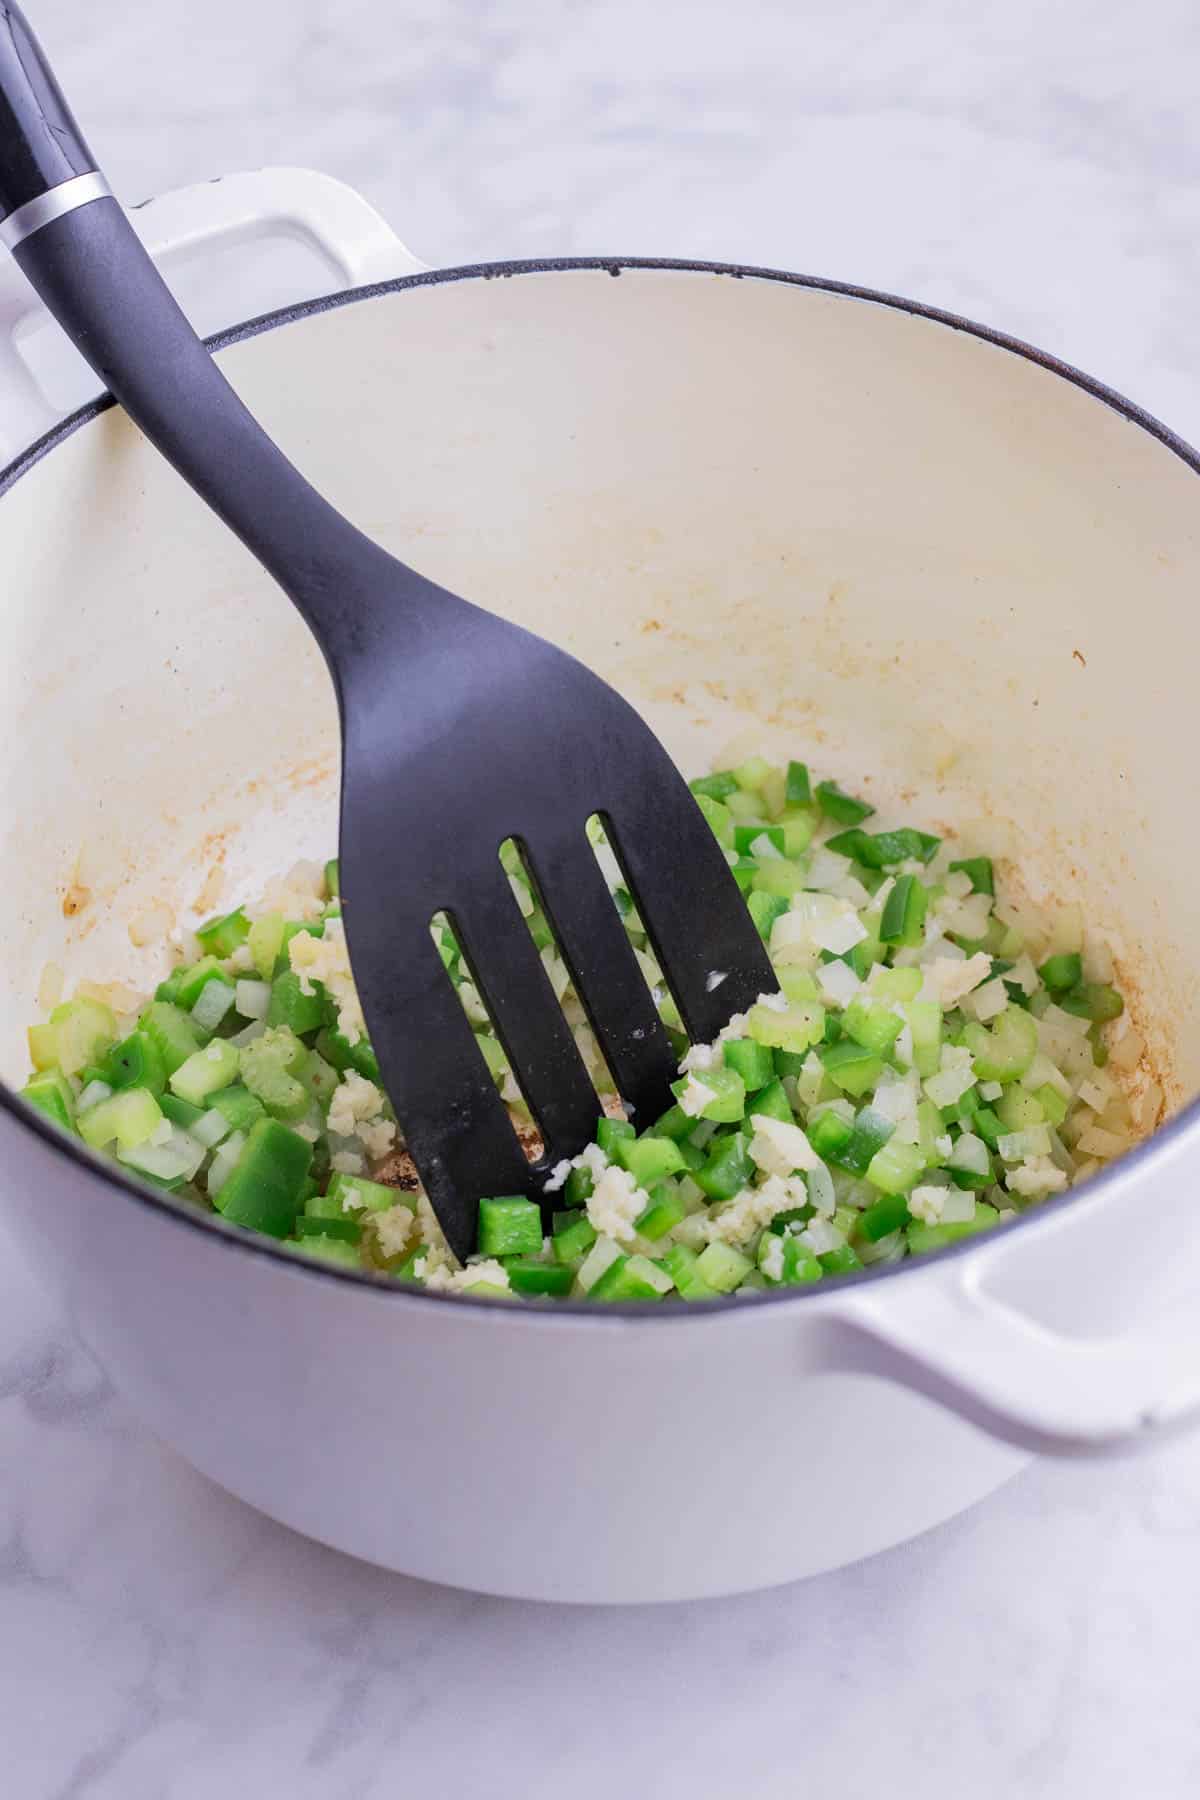 The holy trinity of onion, bell pepper, and celery is cooked in a Dutch oven.